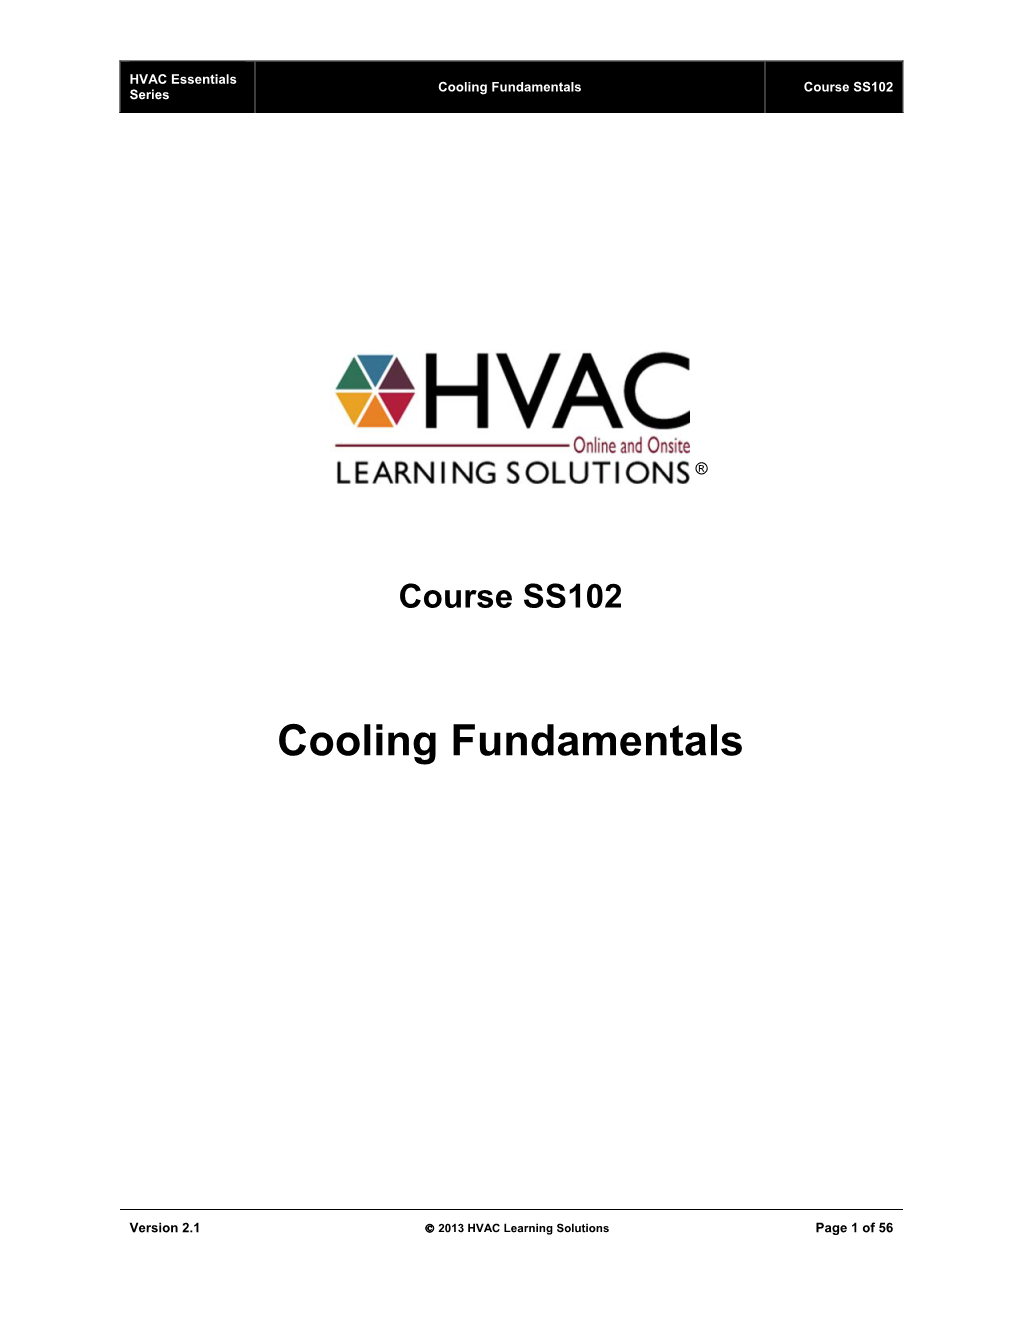 Cooling Fundamentals Course SS102 Series